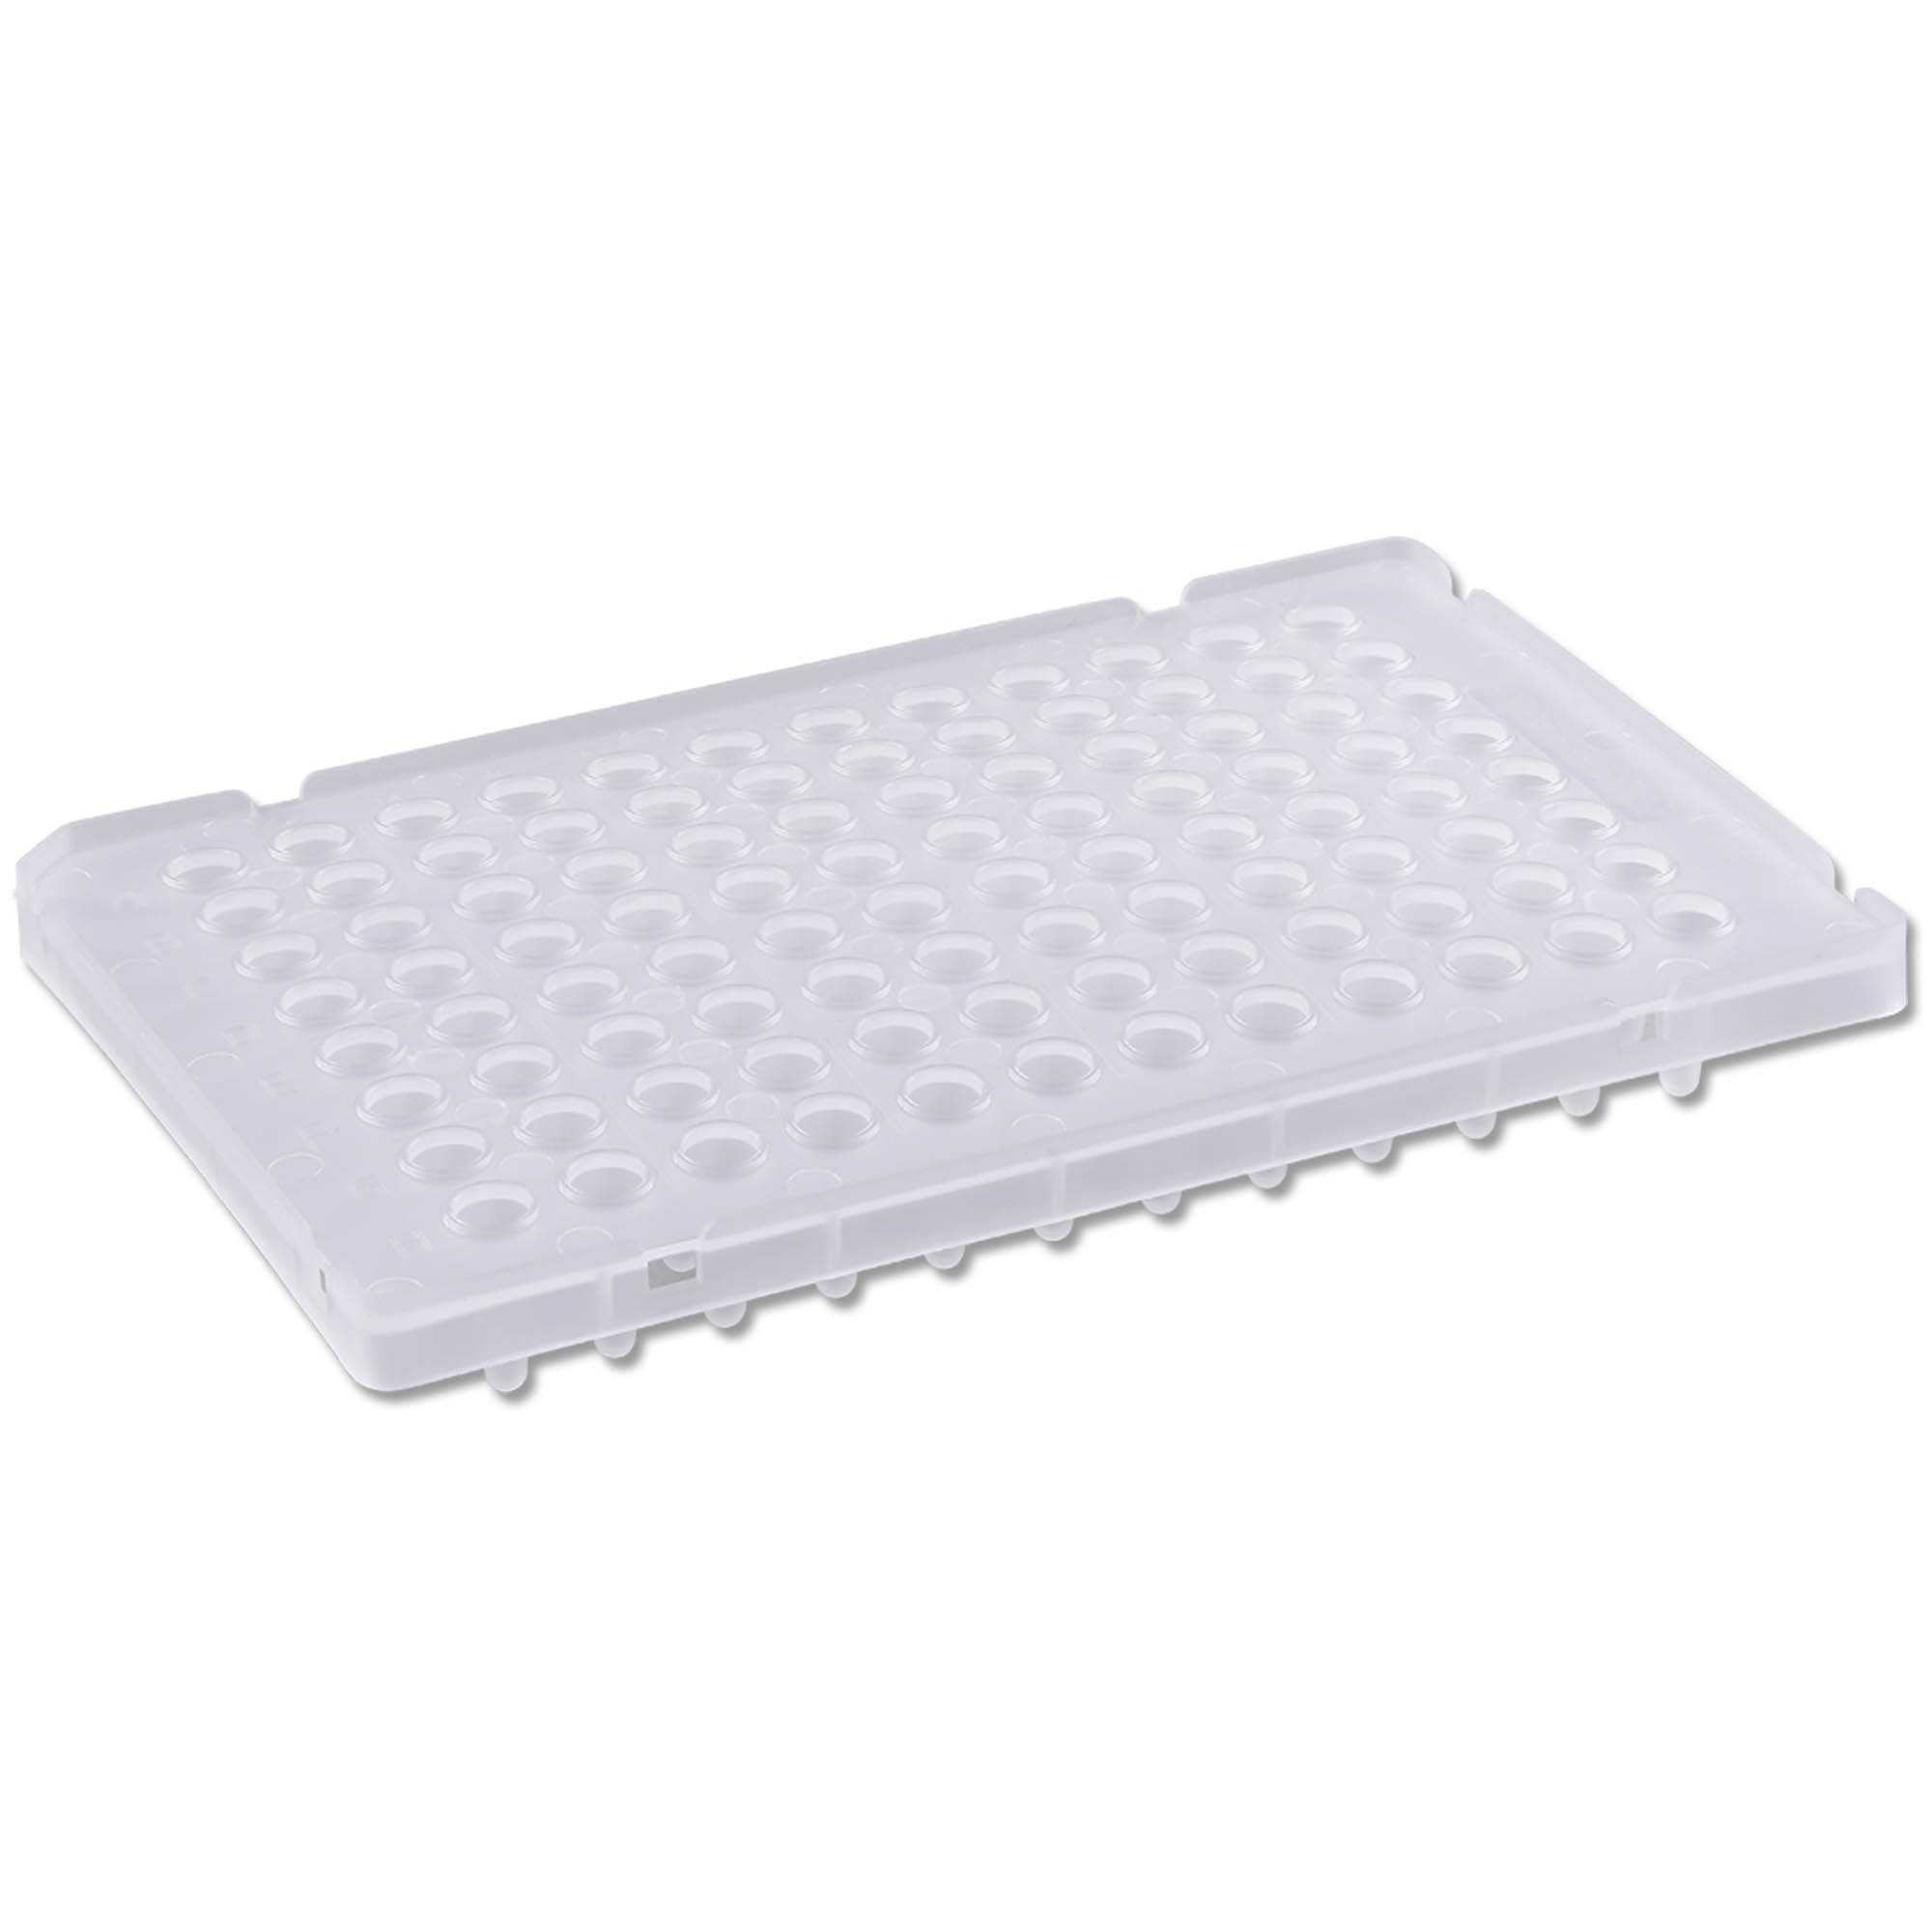 PureAmp Low Profile/Fast 96-Well x 0.1mL PCR Plates - Semi Skirted with Raised Rim, Natural (Pack of 50)